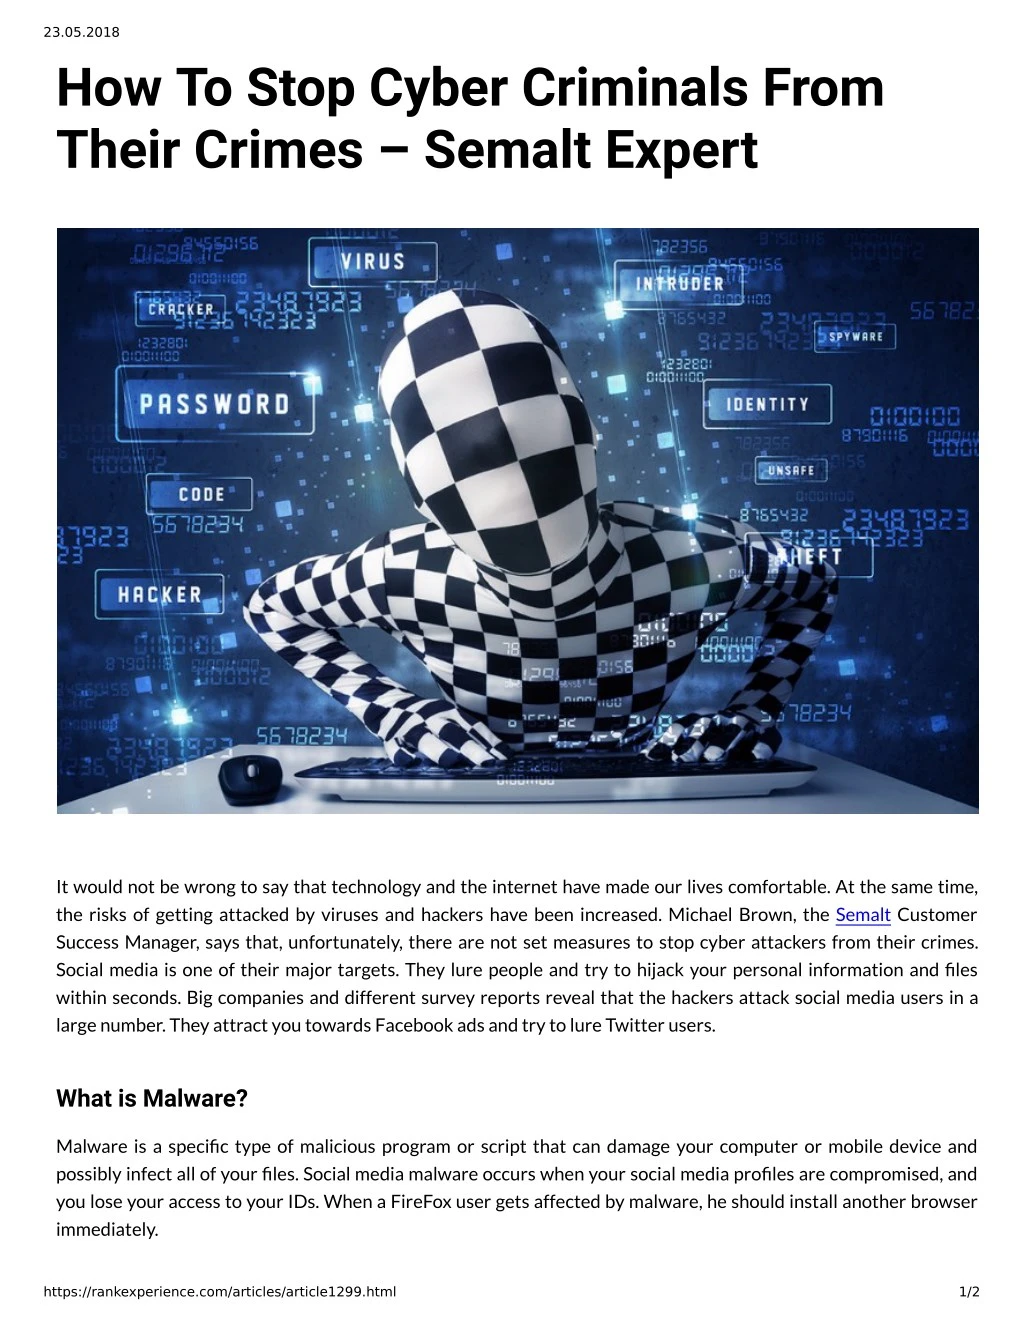 23 05 2018 how to stop cyber criminals from their